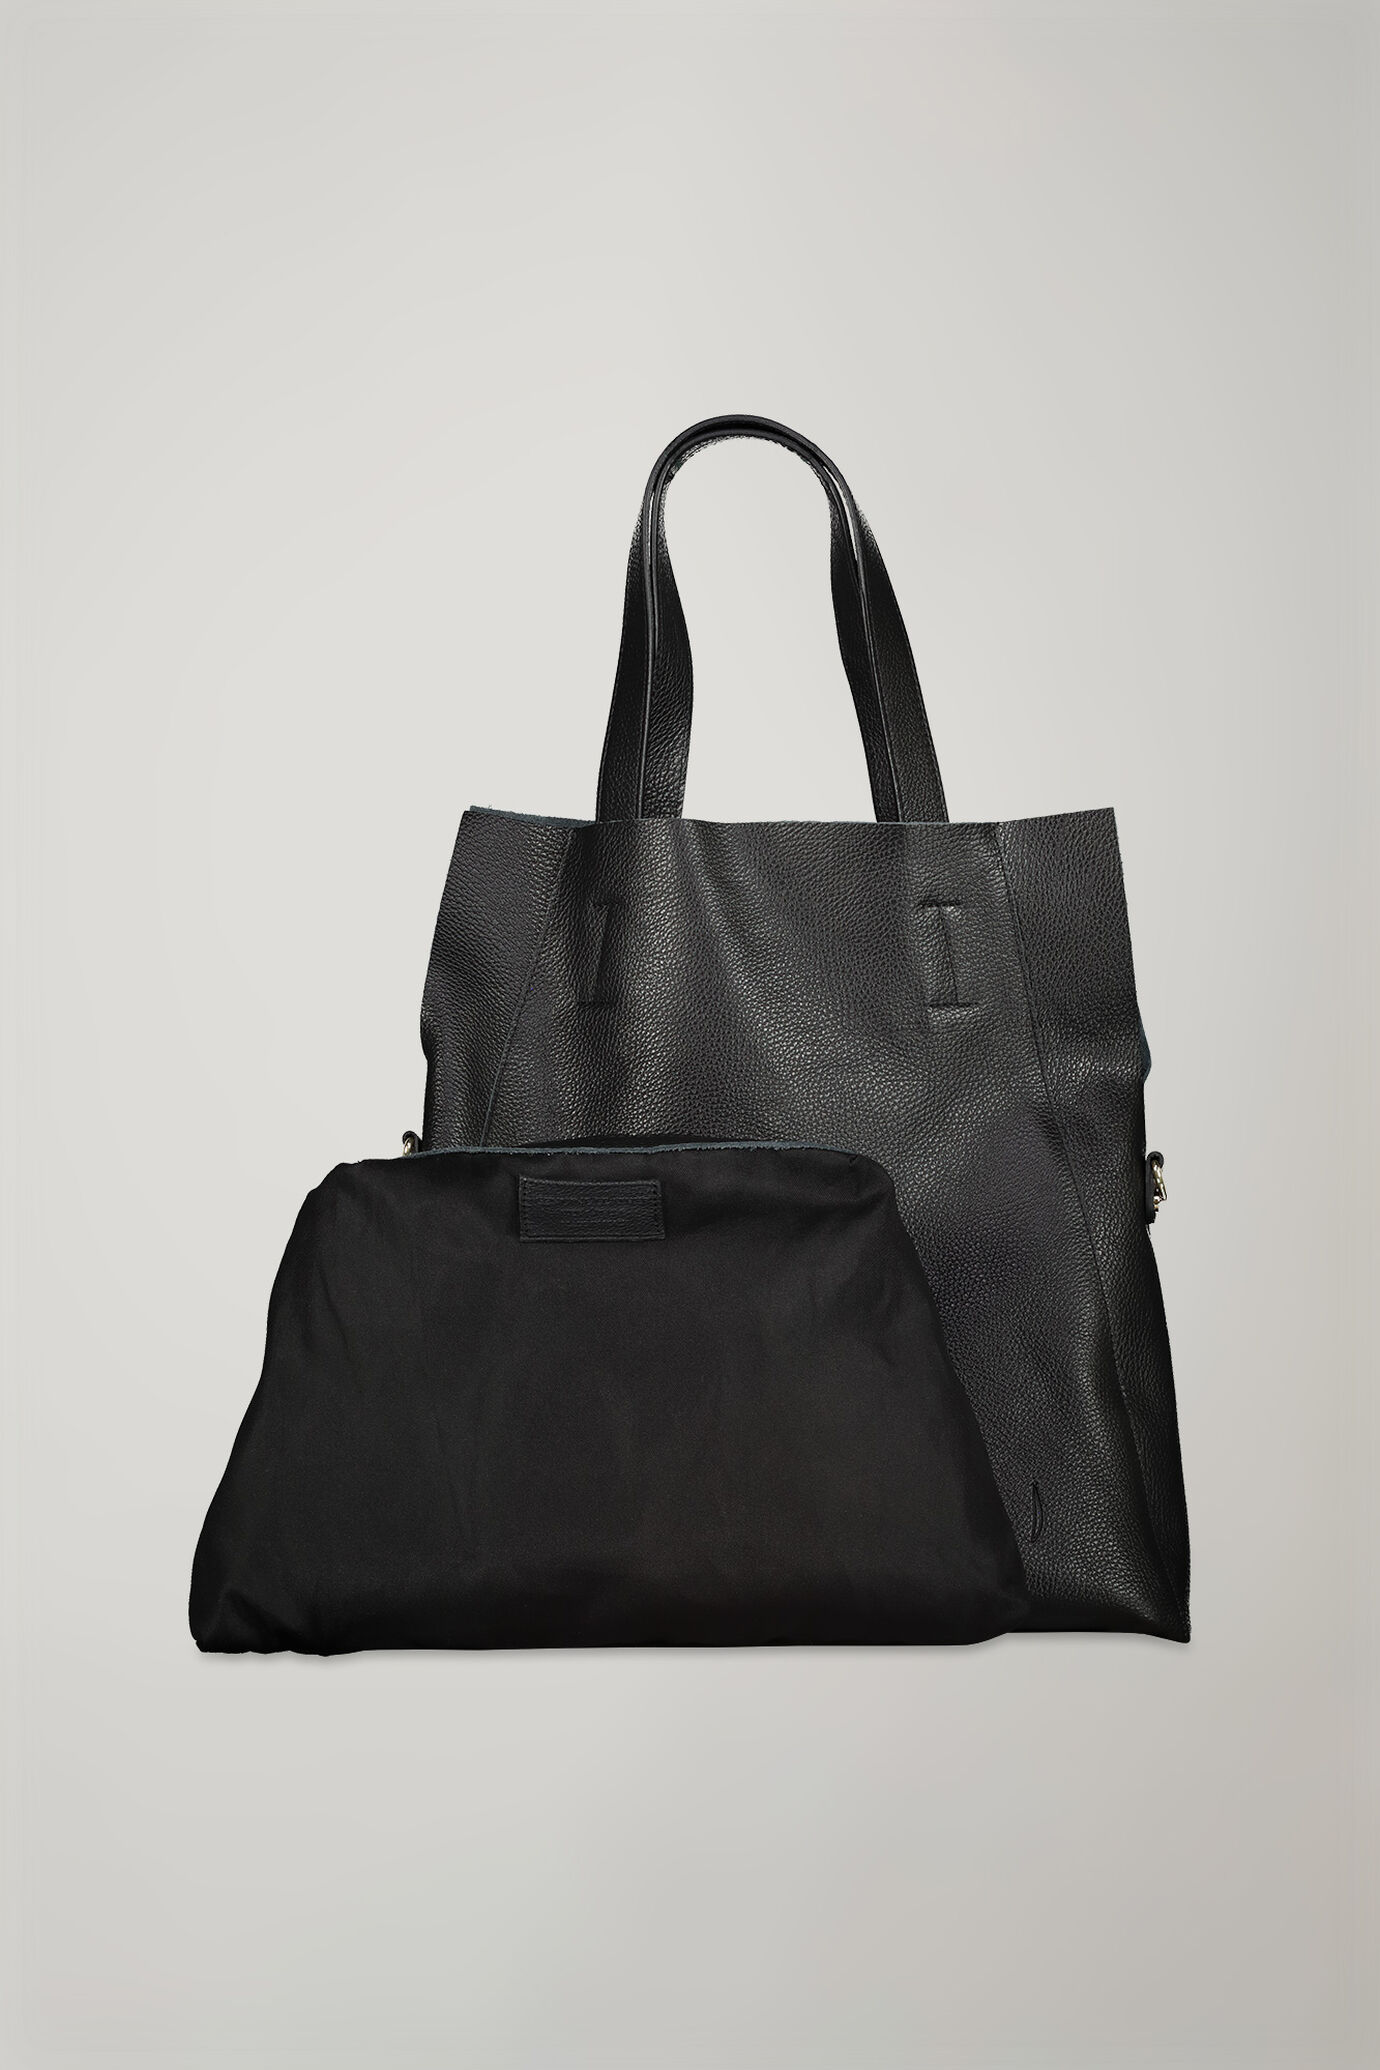 Women’s bag 100% leather